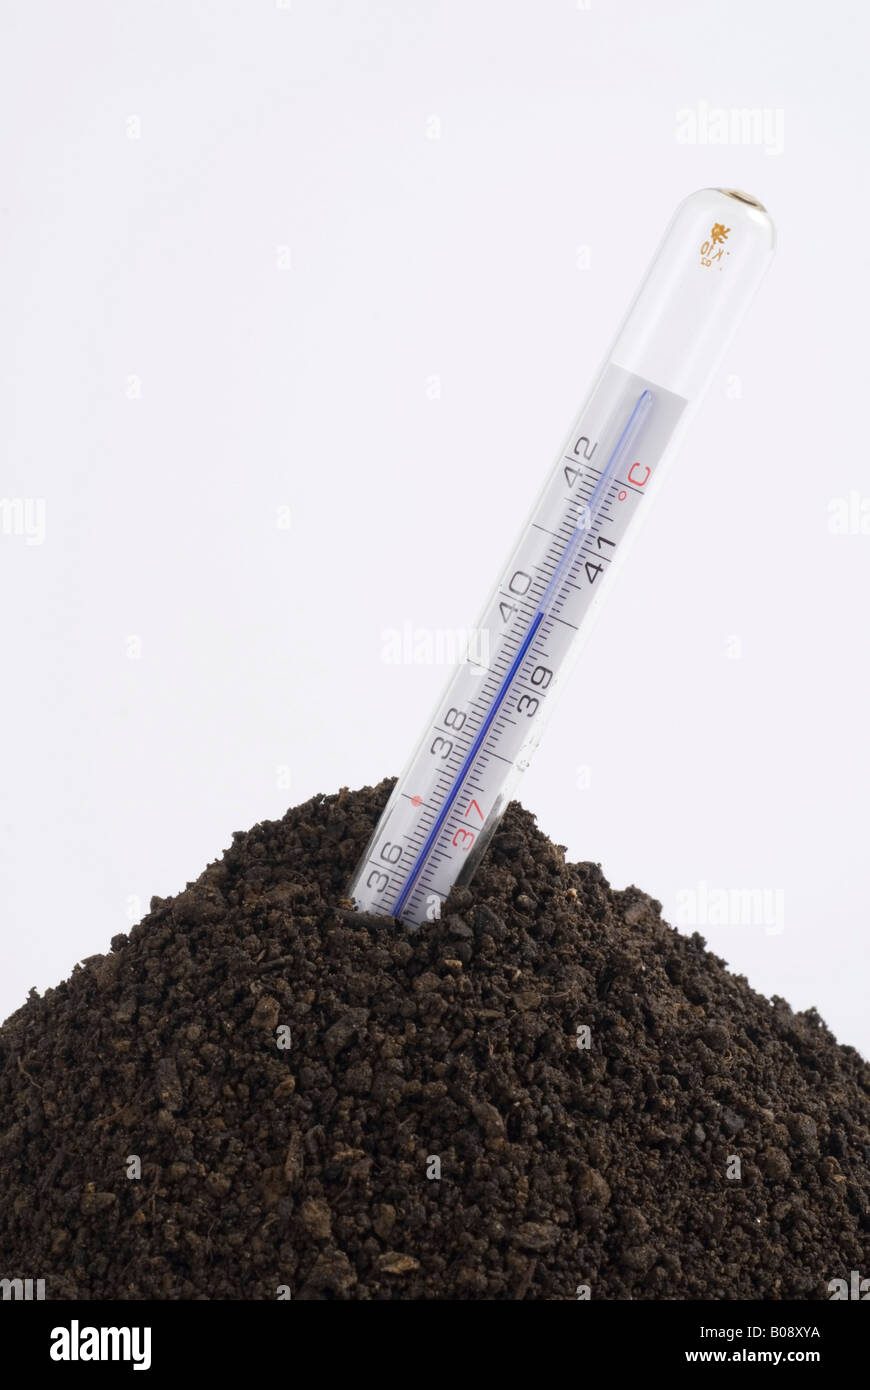 Thermometer in a pile of soil, symbolic for global warming Stock Photo